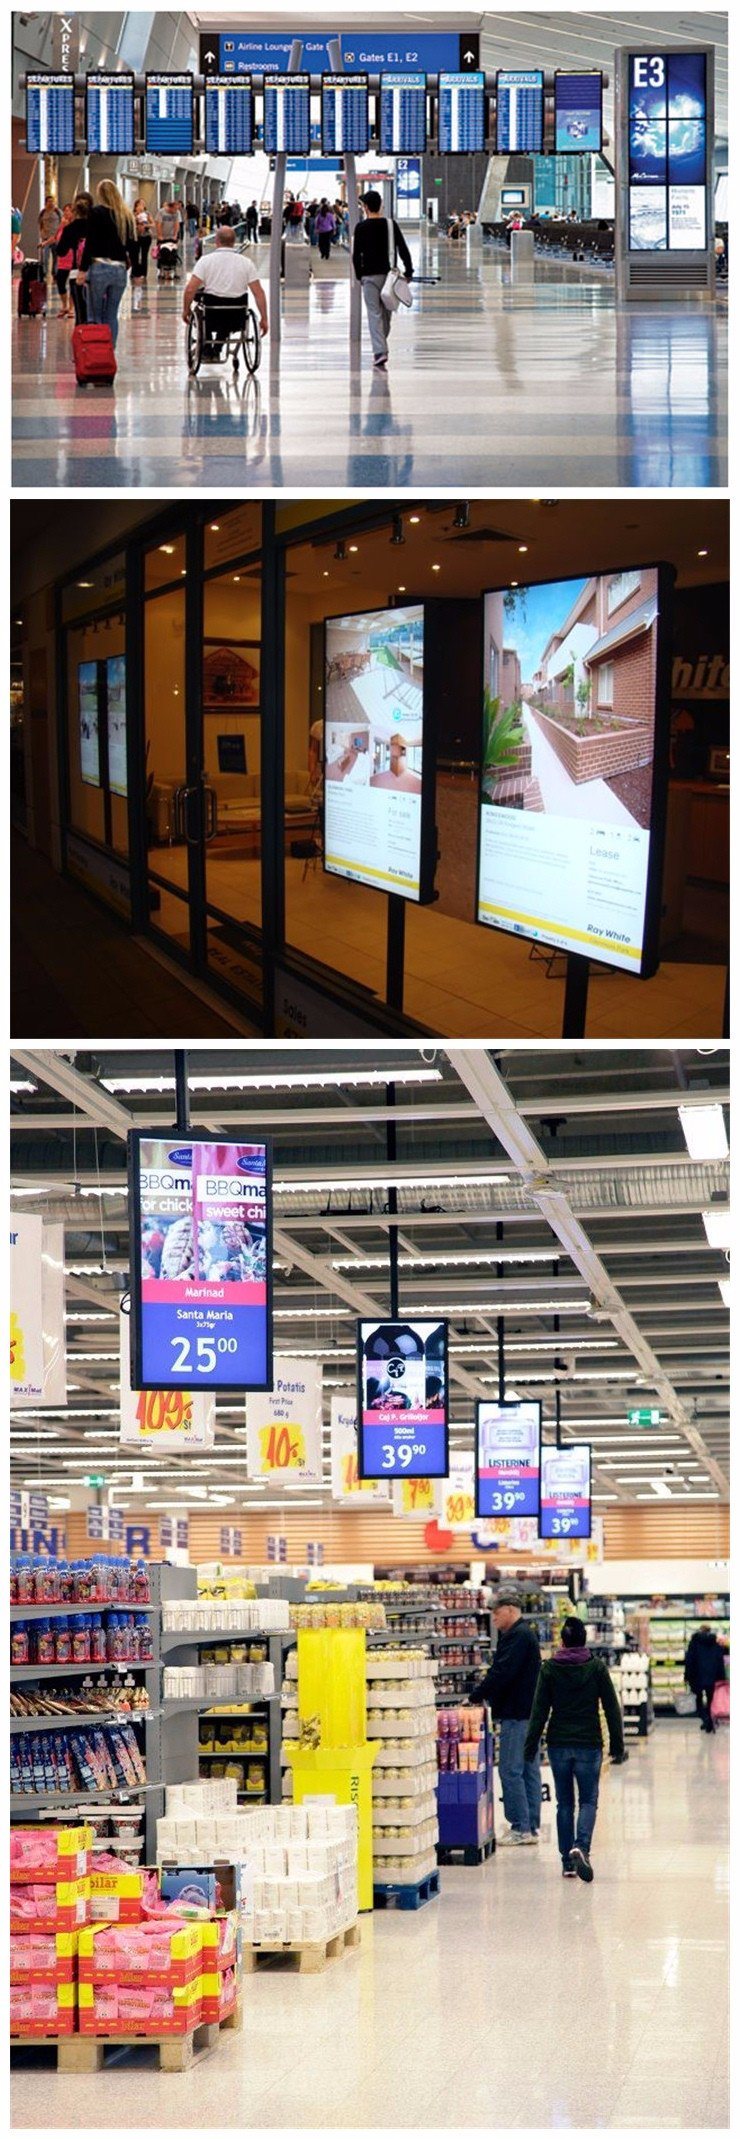 21.5 Wall Mount Display Outdoor LCD Ad Player LCD Digital Signage Inch Touch Screen Monitor Advertising Market